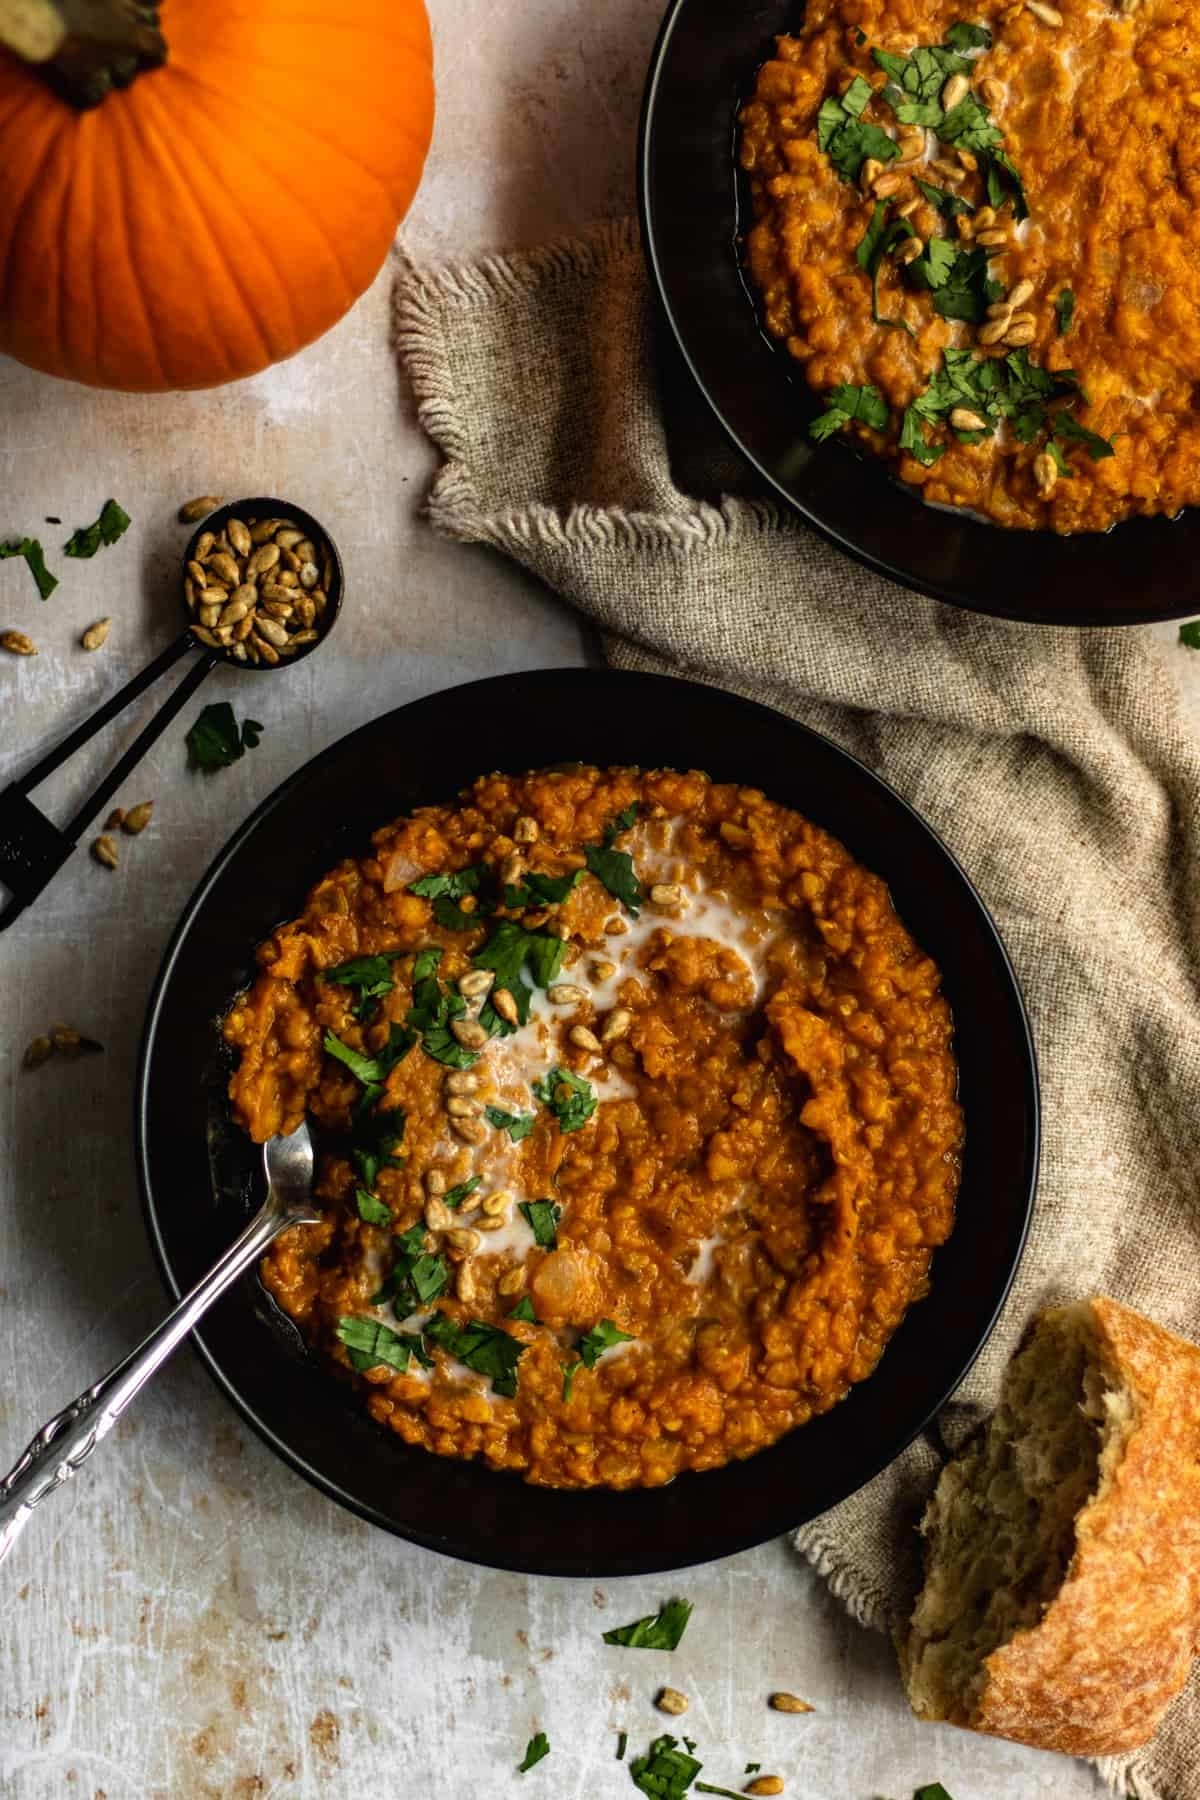 Creamy spiced pumpkin soup with lentils swirled in a bowl.